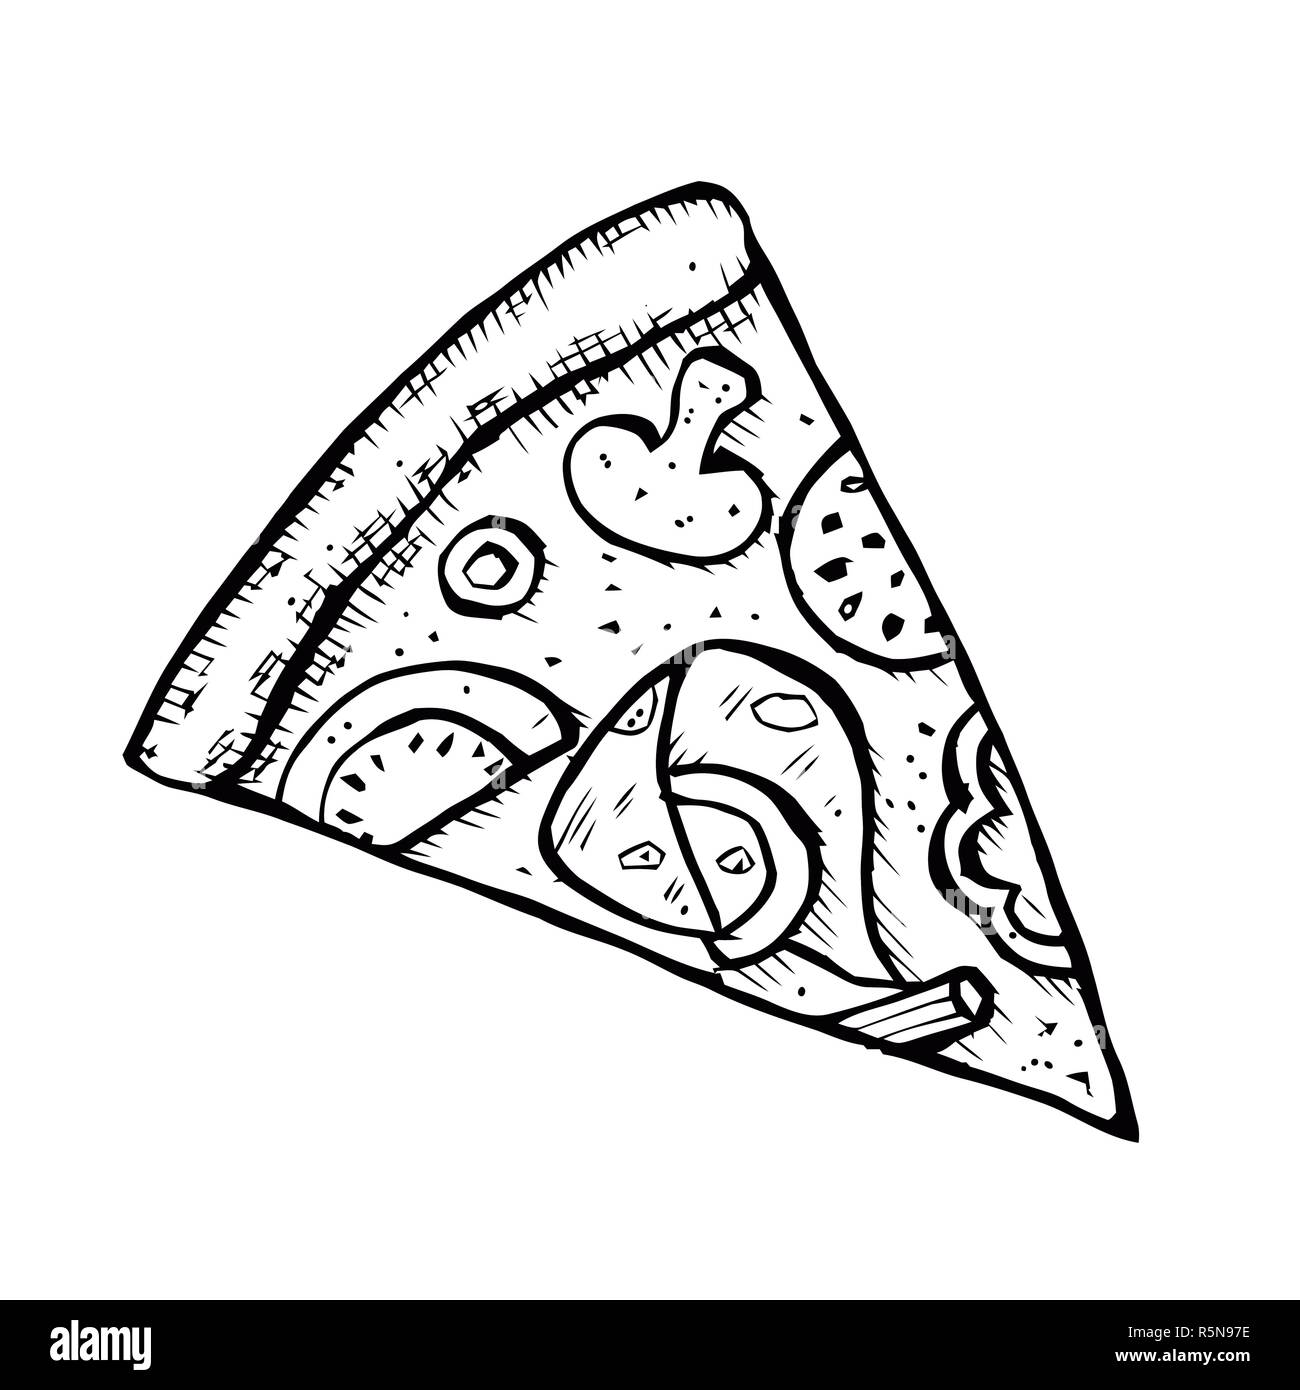 Pizza Hand Drawn Vector Illustration Pizza Slices In Pieces Of Corners